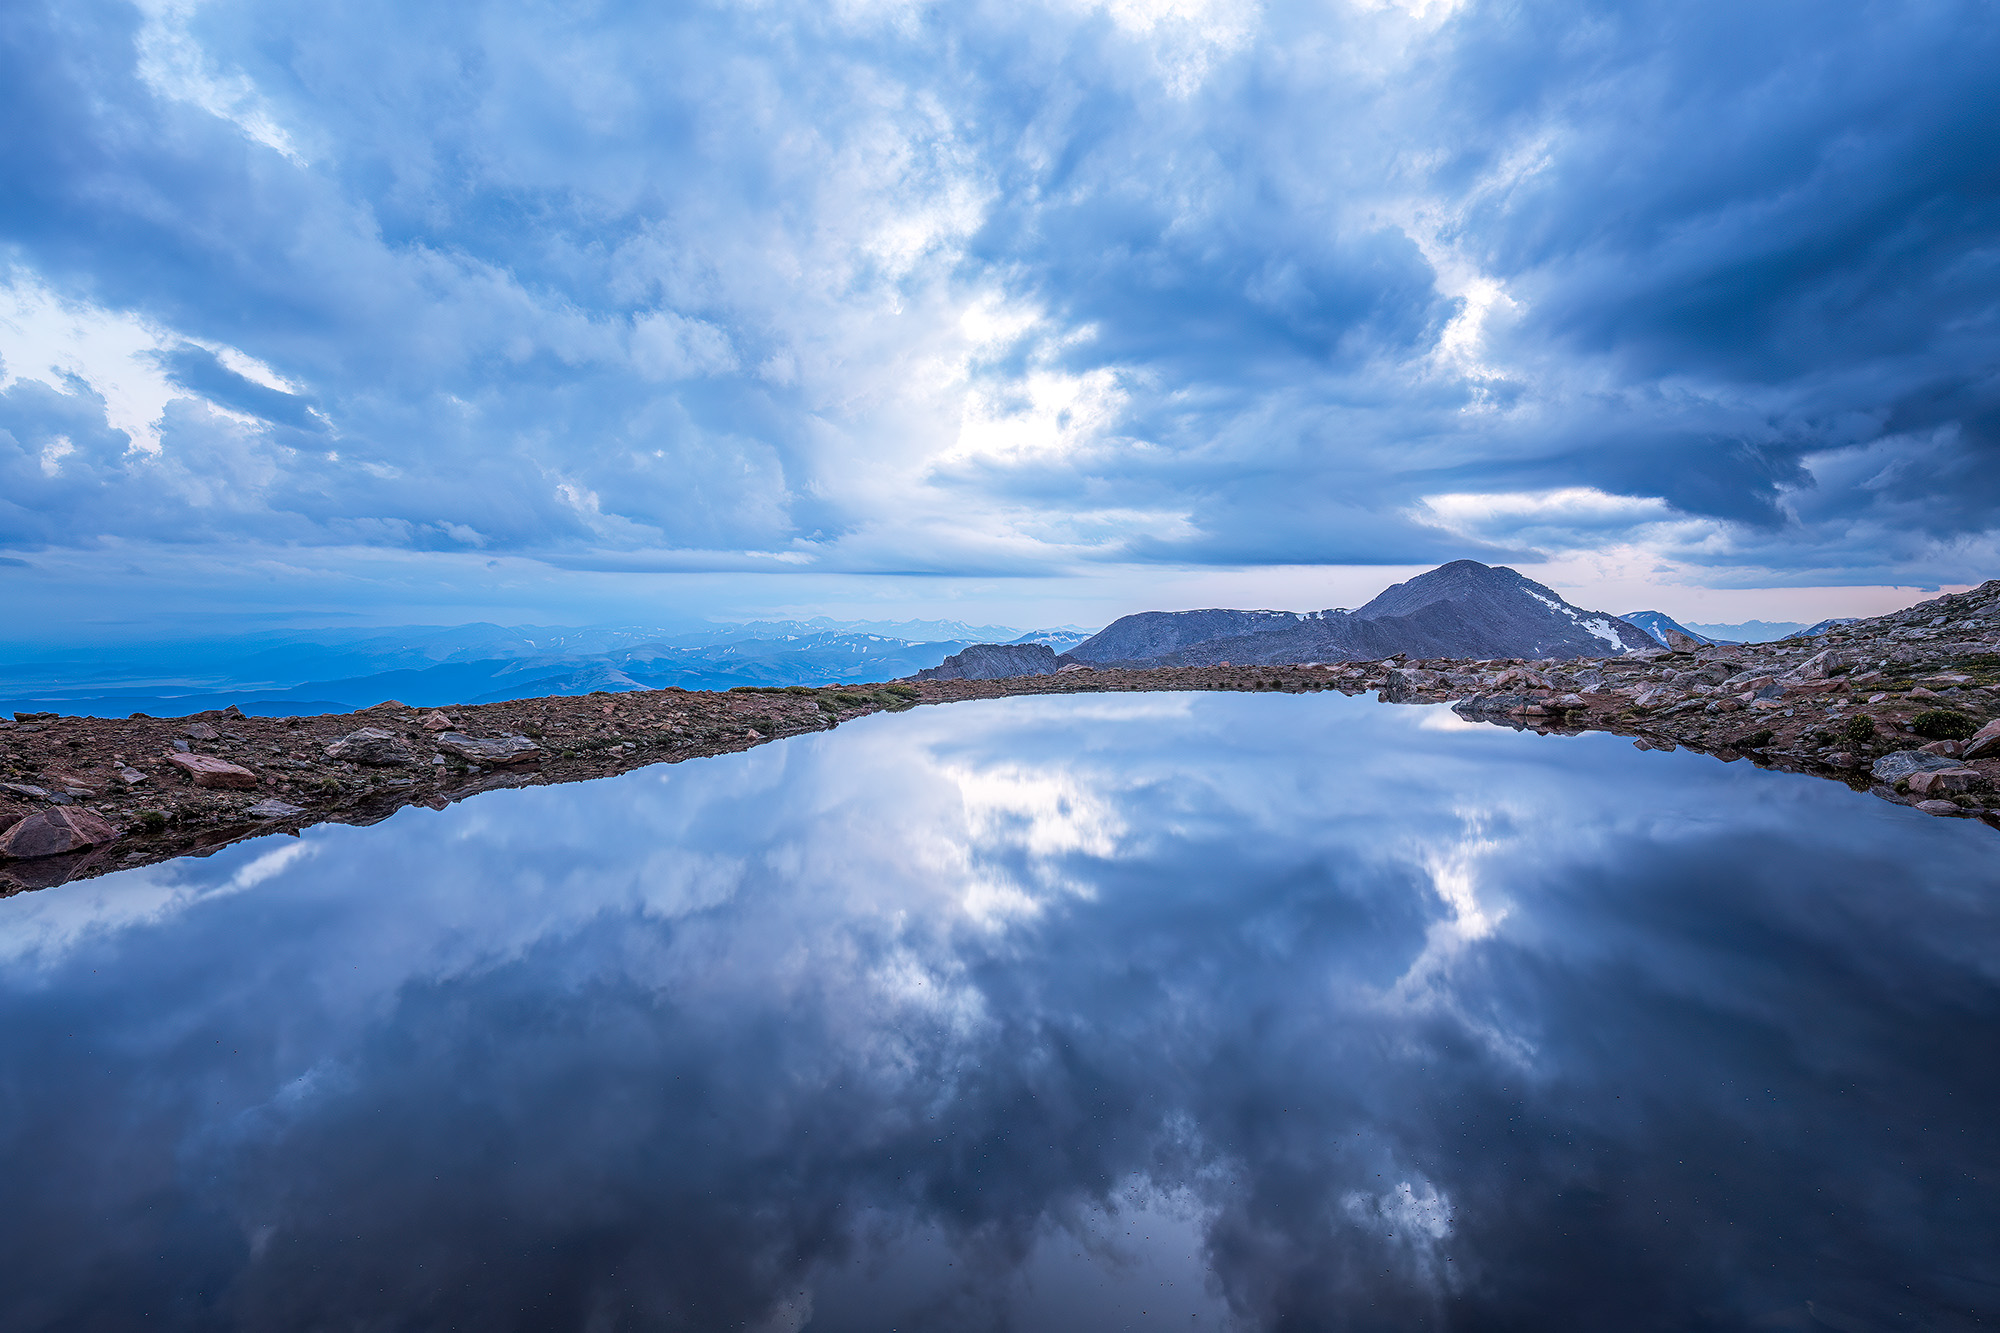 This image captures the an alpine escape atop Mount Evans, Colorado. A serene tarn rests amidst the rugged landscape, mirroring...